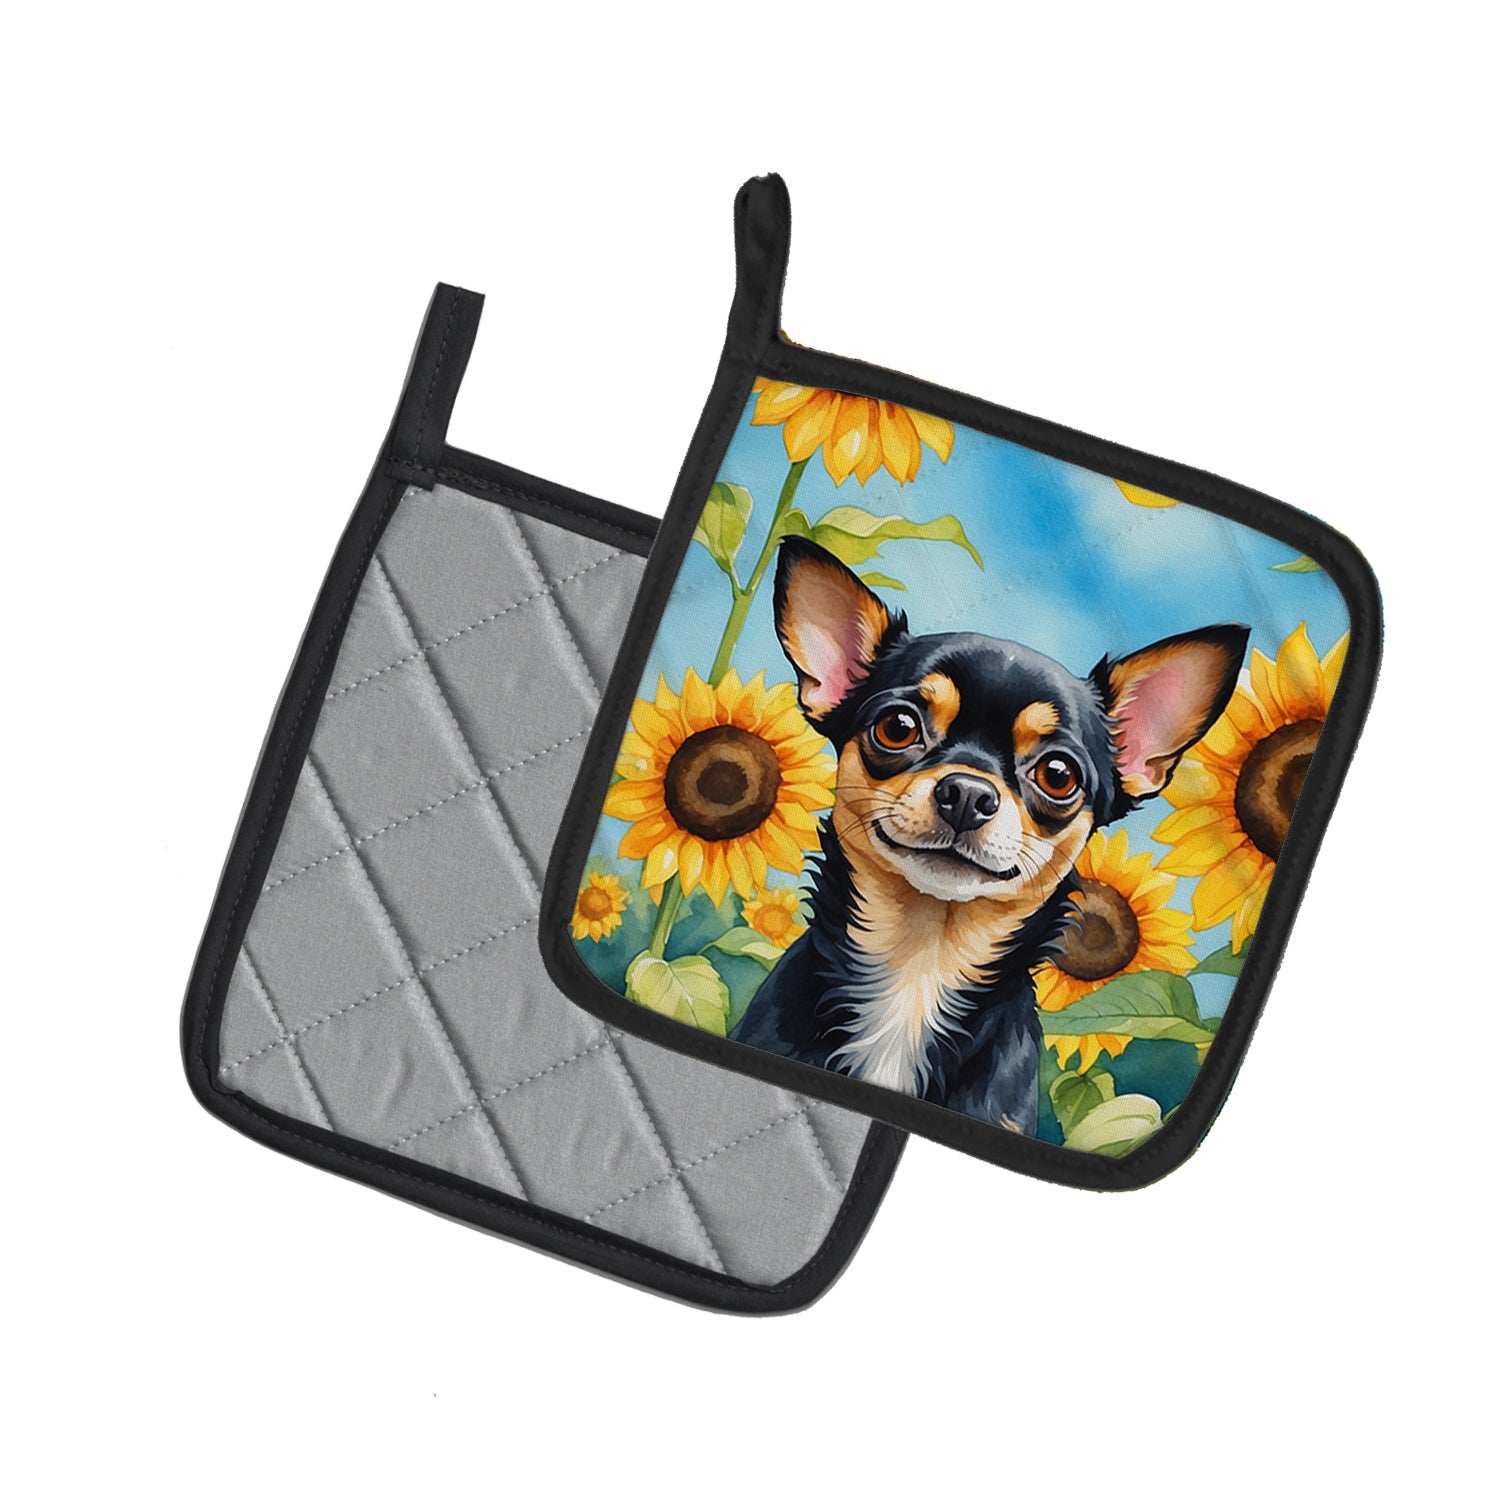 Buy this Chihuahua in Sunflowers Pair of Pot Holders